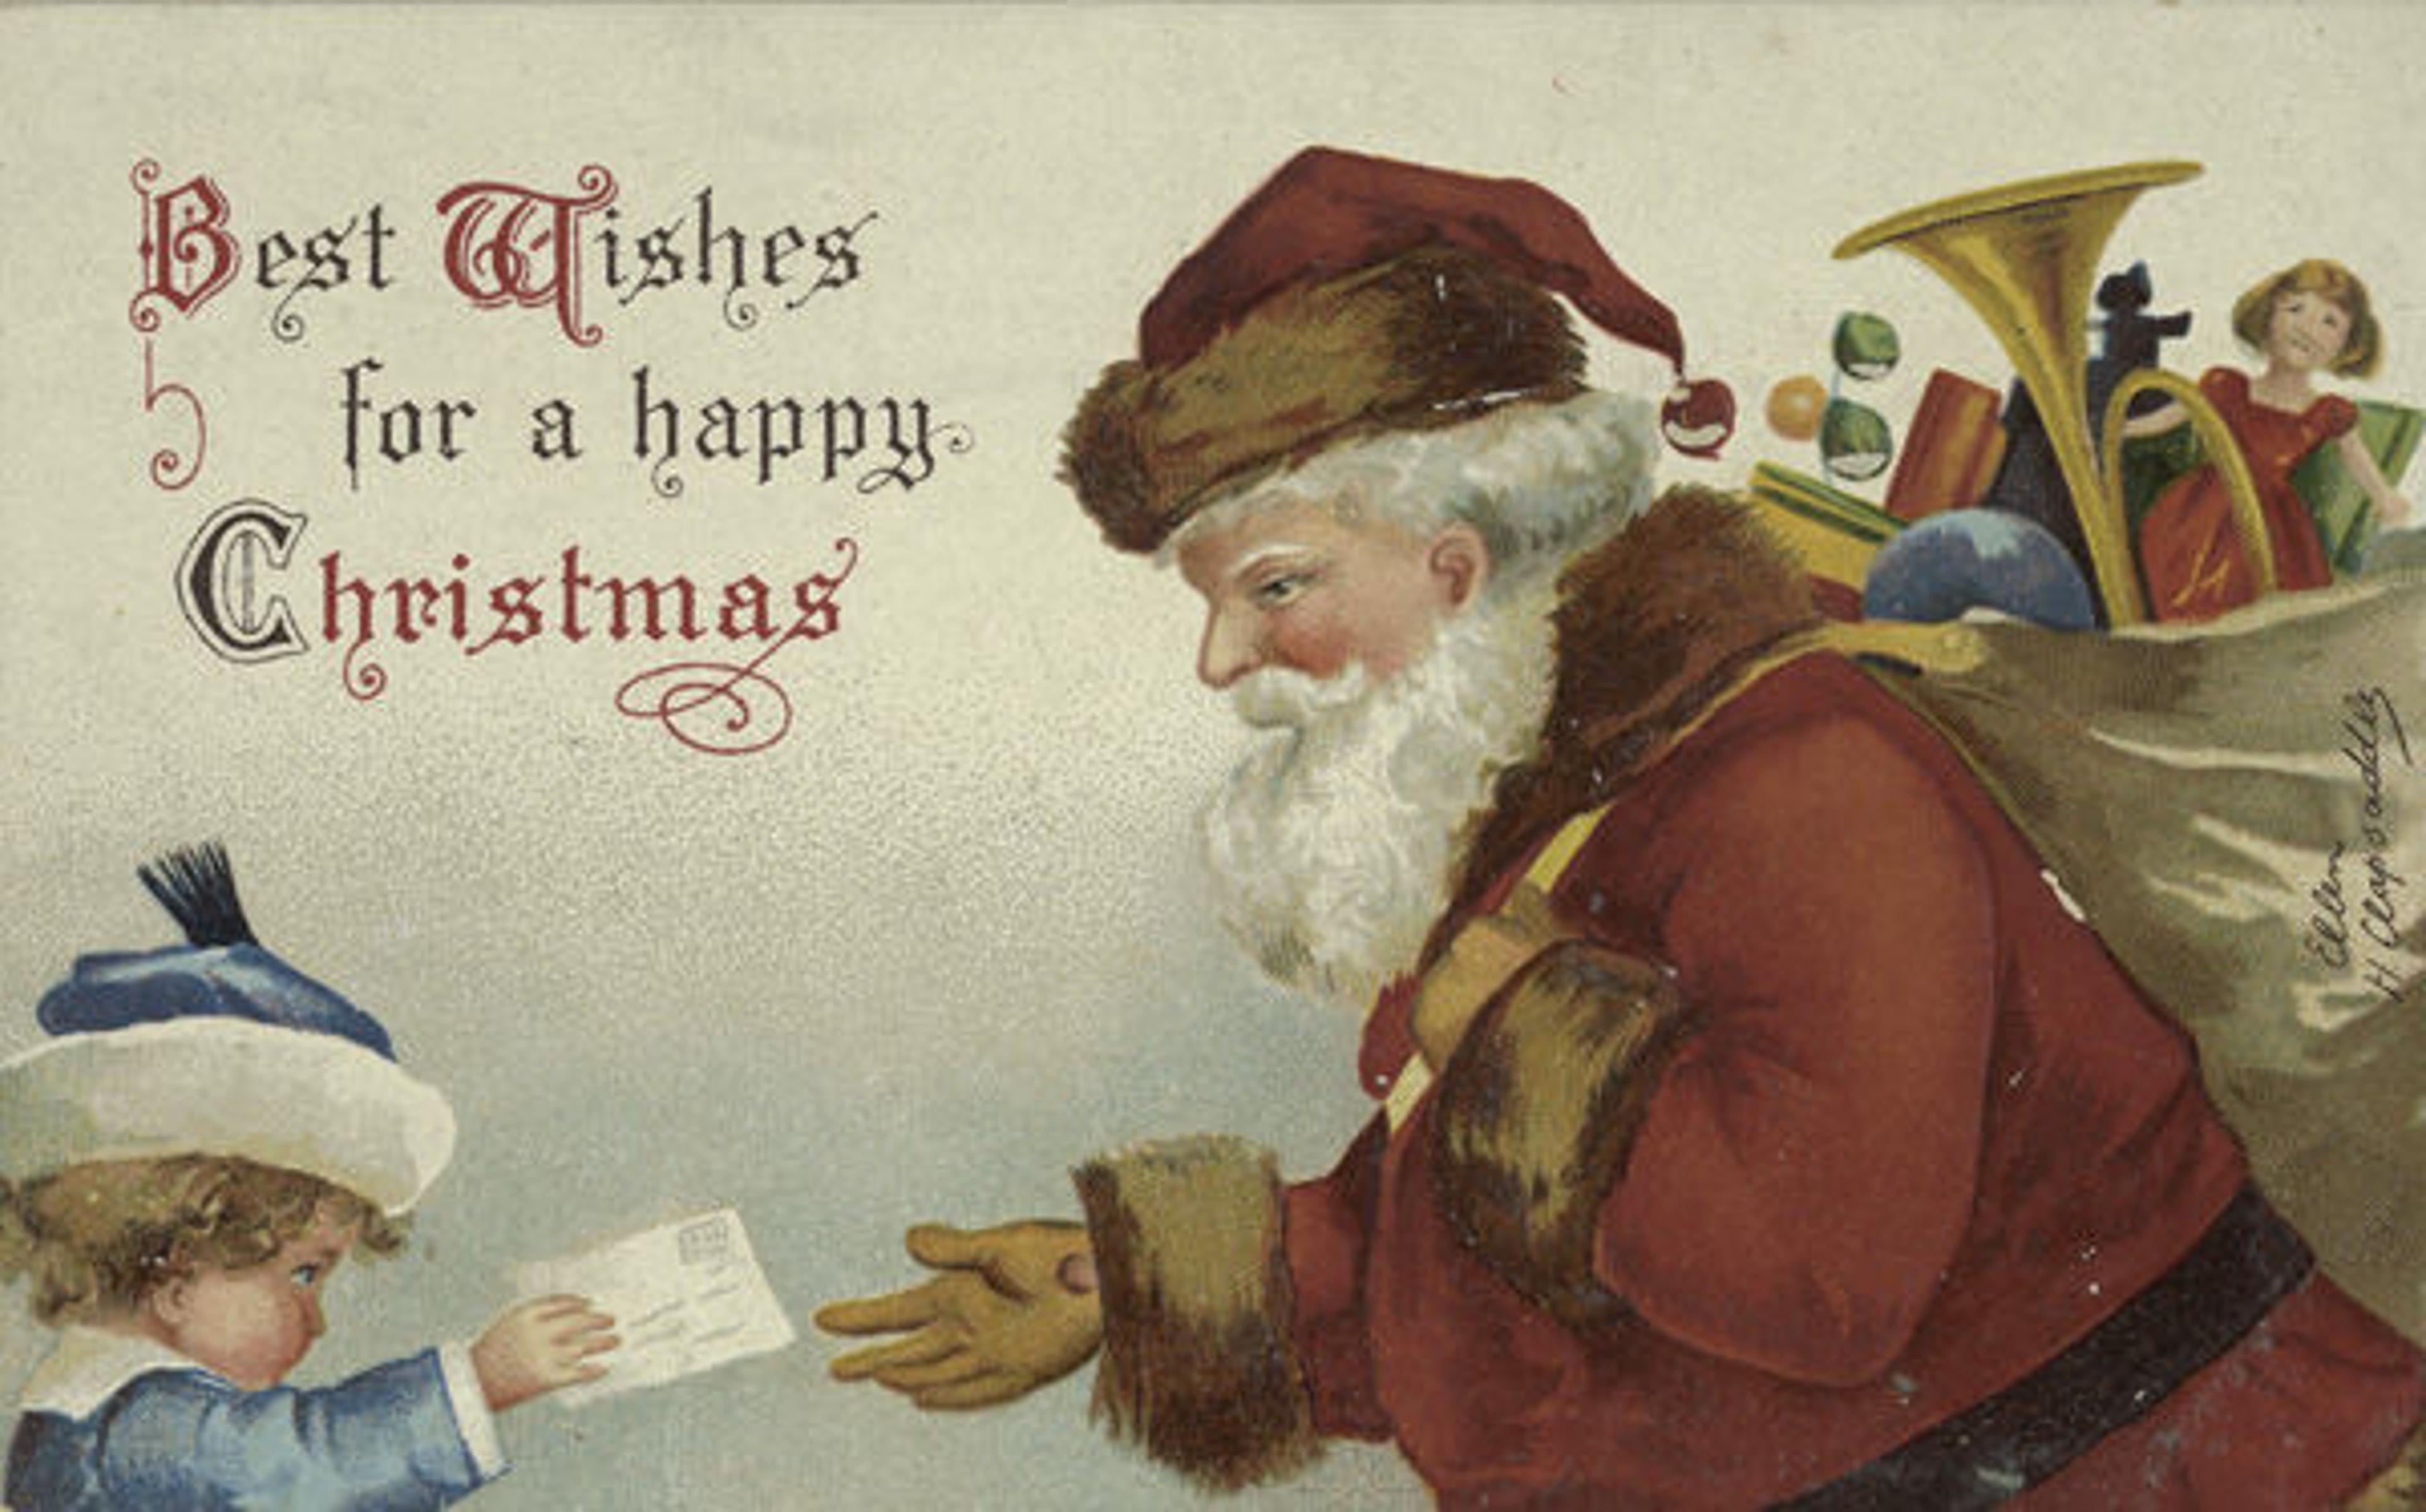 Best Wishes for a happy Christmas, early 20th century